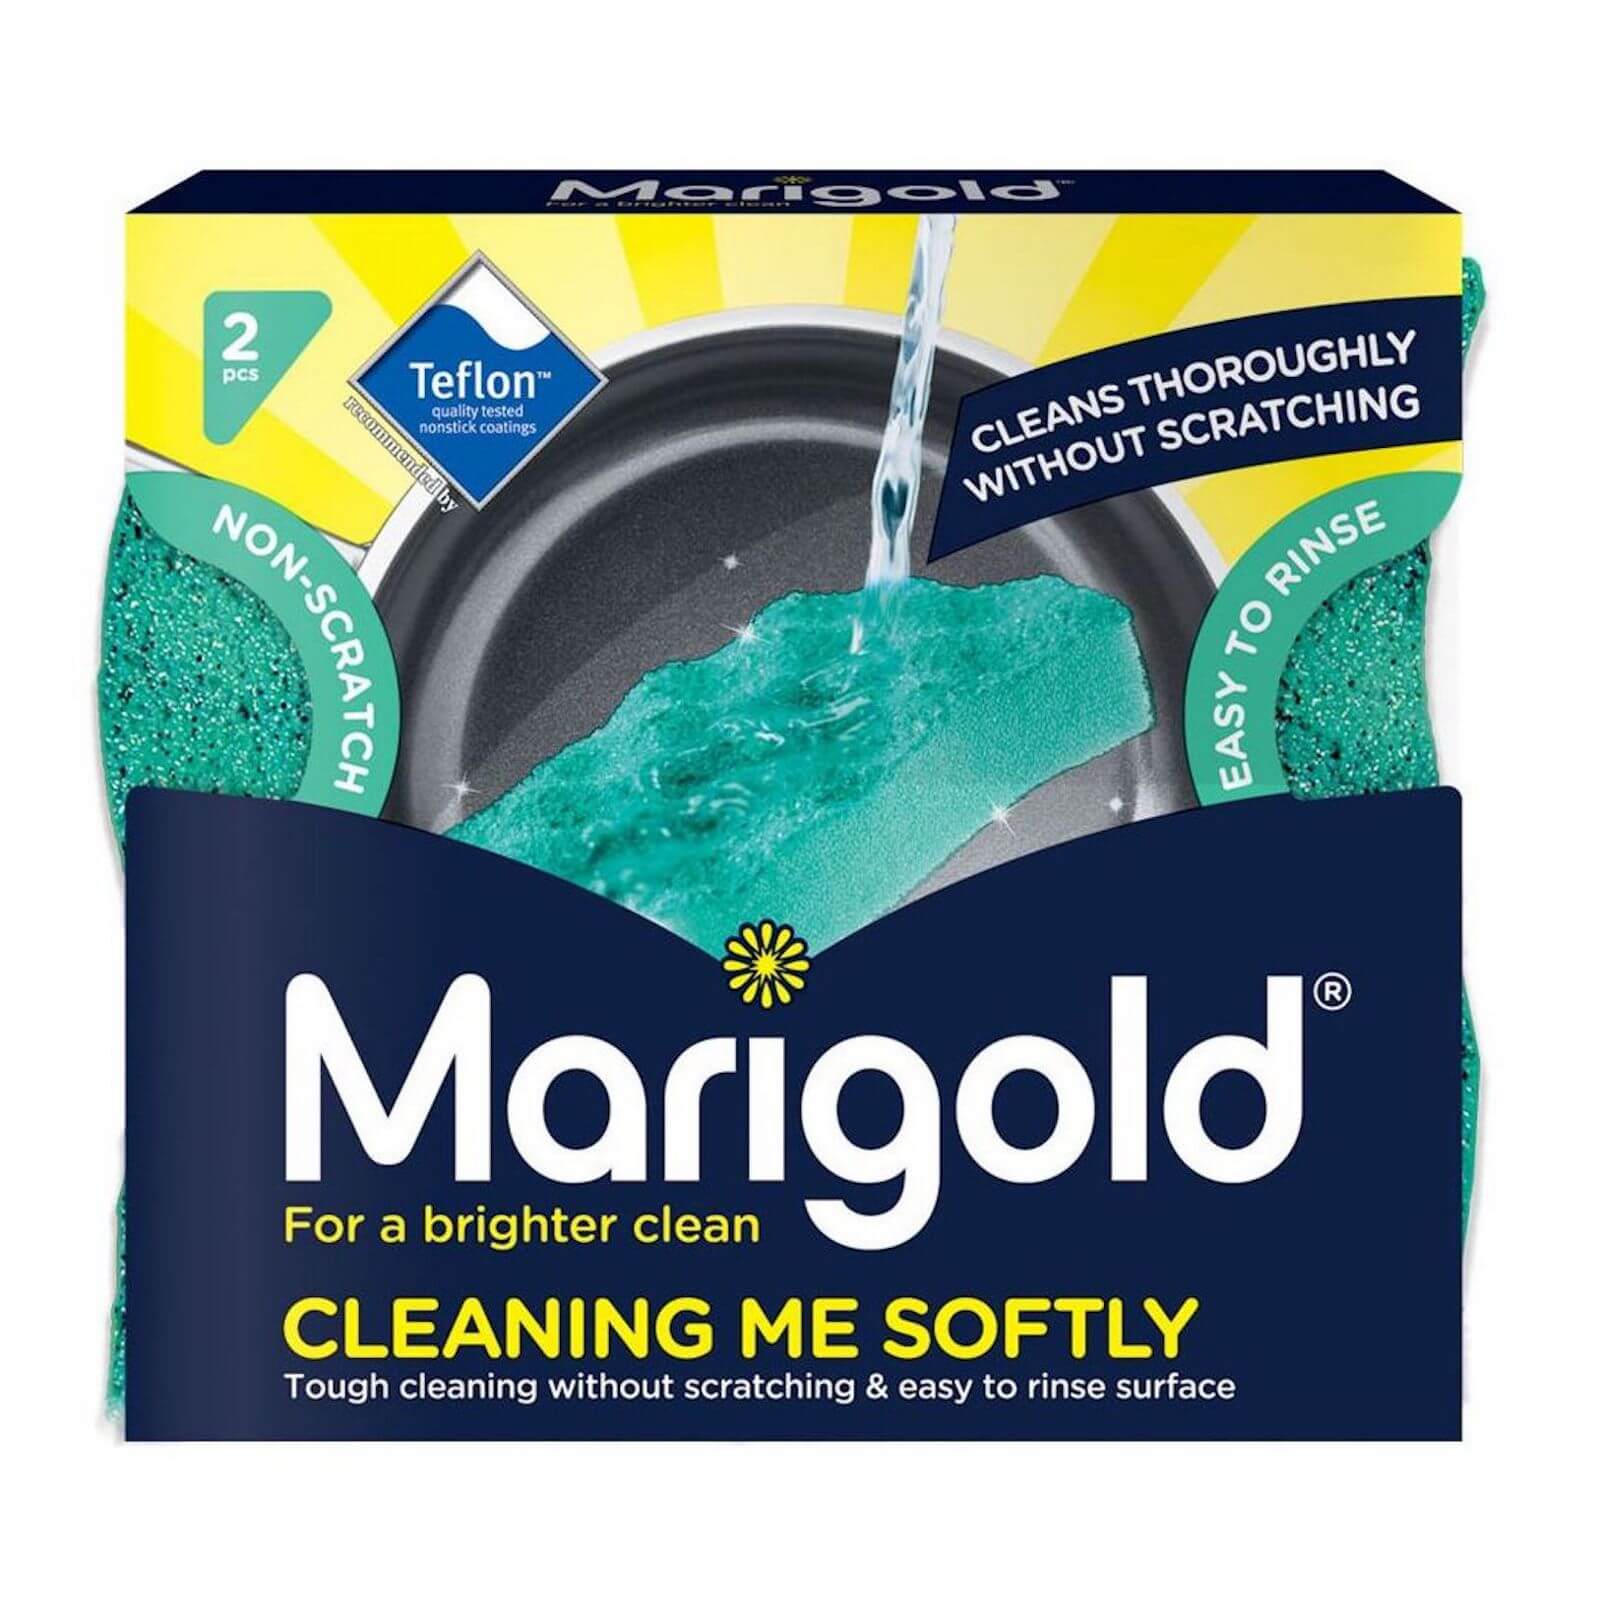 Photo of Marigold Cleaning Me Softly Scourers - Pack Of 2